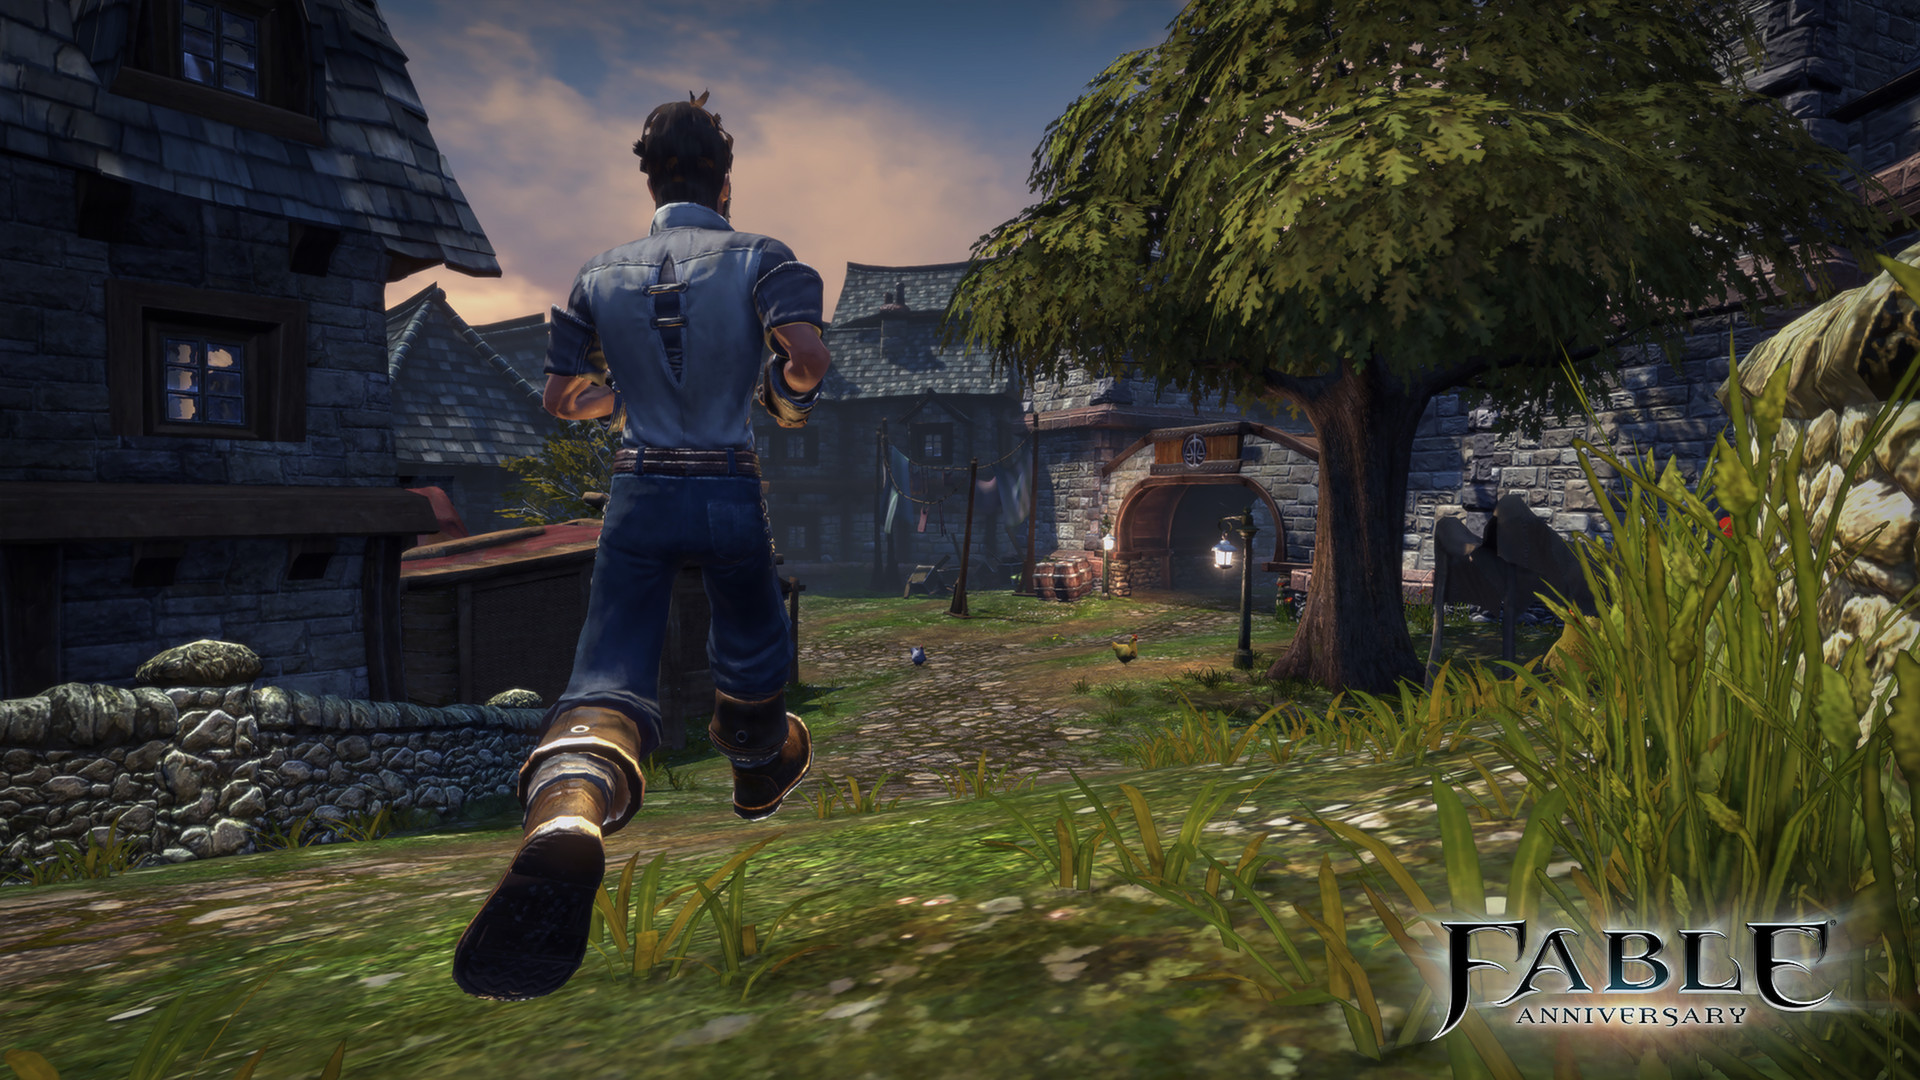 Fable System Requirements (Minimum)